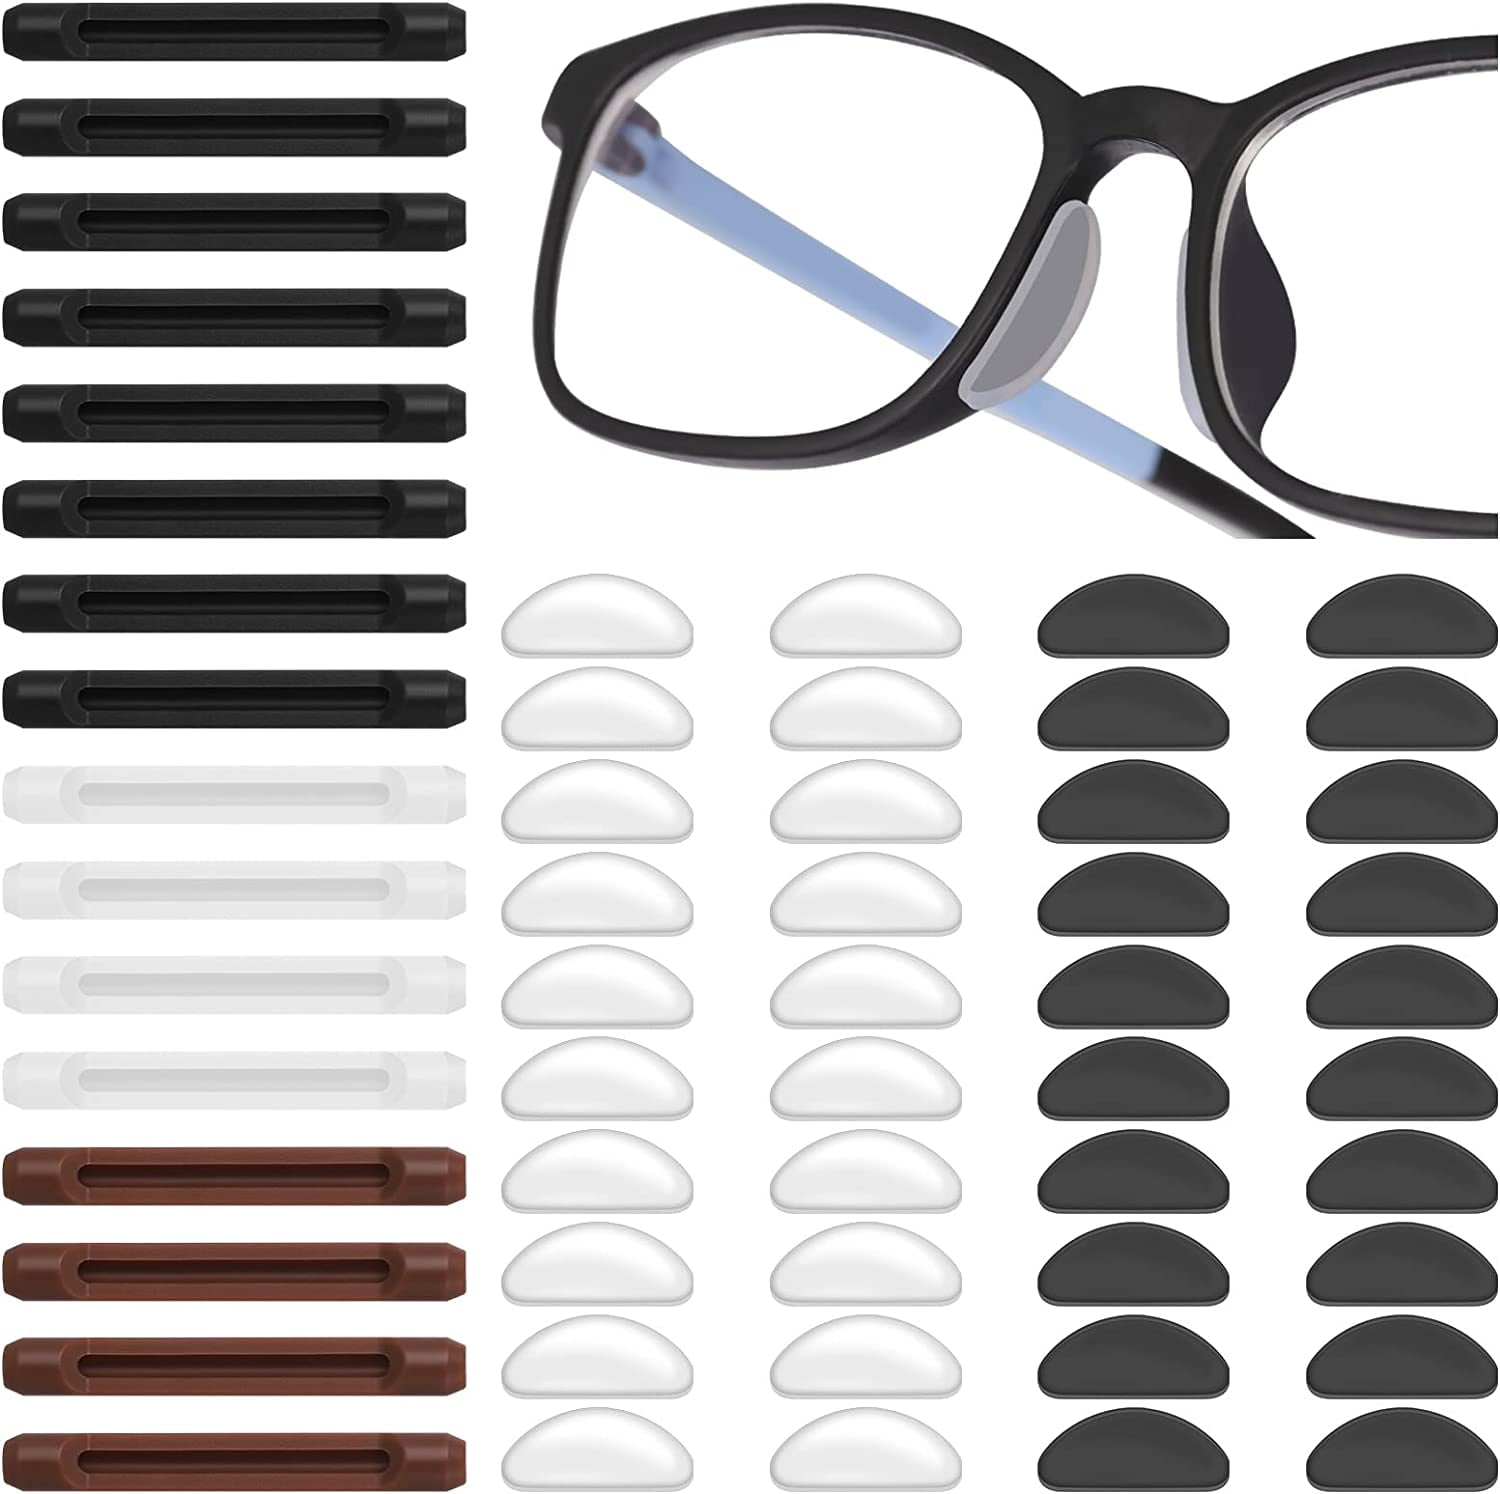 Best Nose Pads and Ear Hooks to Keep Your Glasses in Place - 8